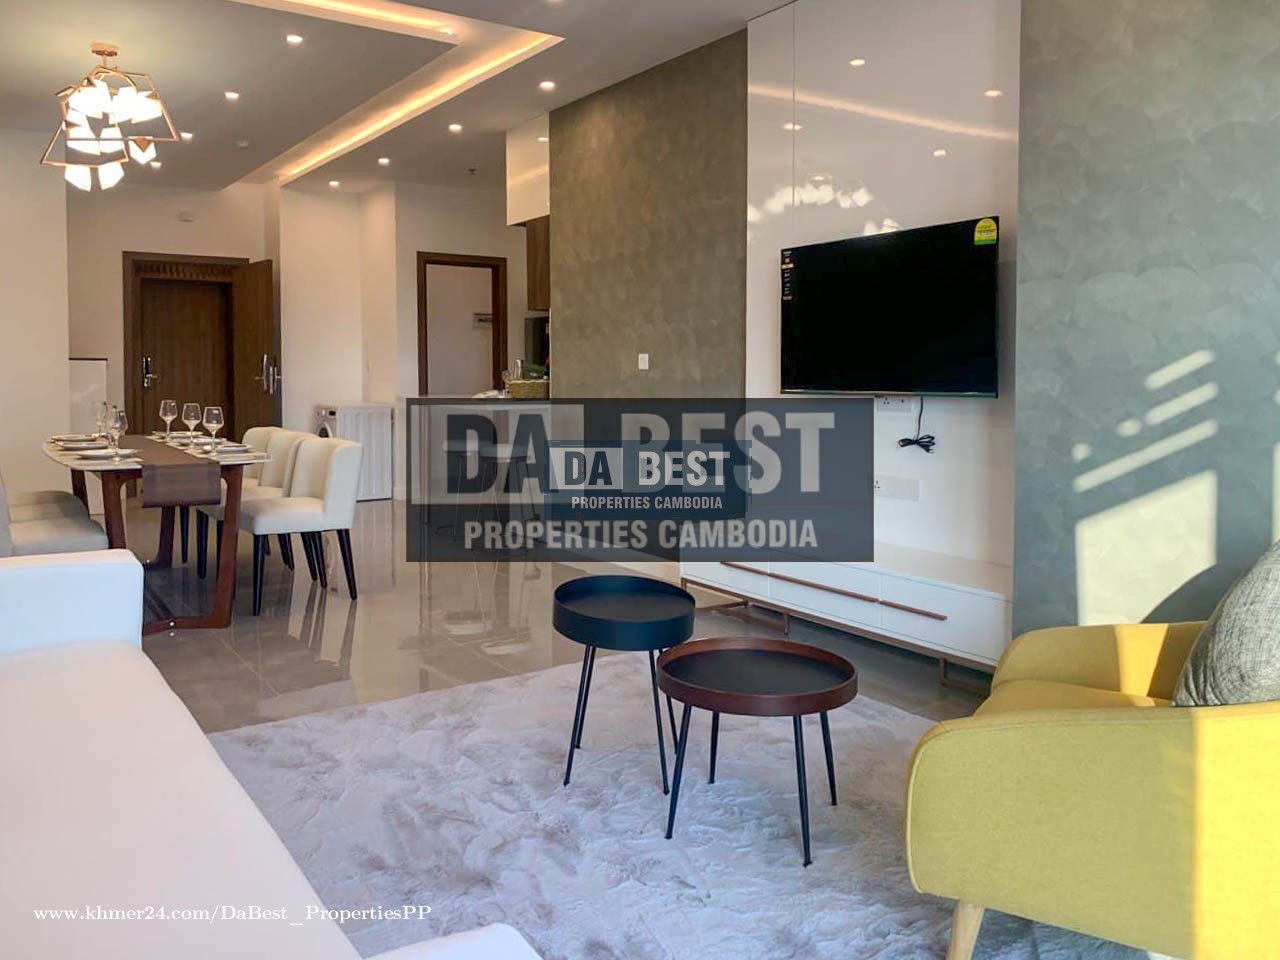 DABEST PROPERTIES: 3 Bedroom Brand New Condo for rent in Chroy Changvar- Phnom Penh